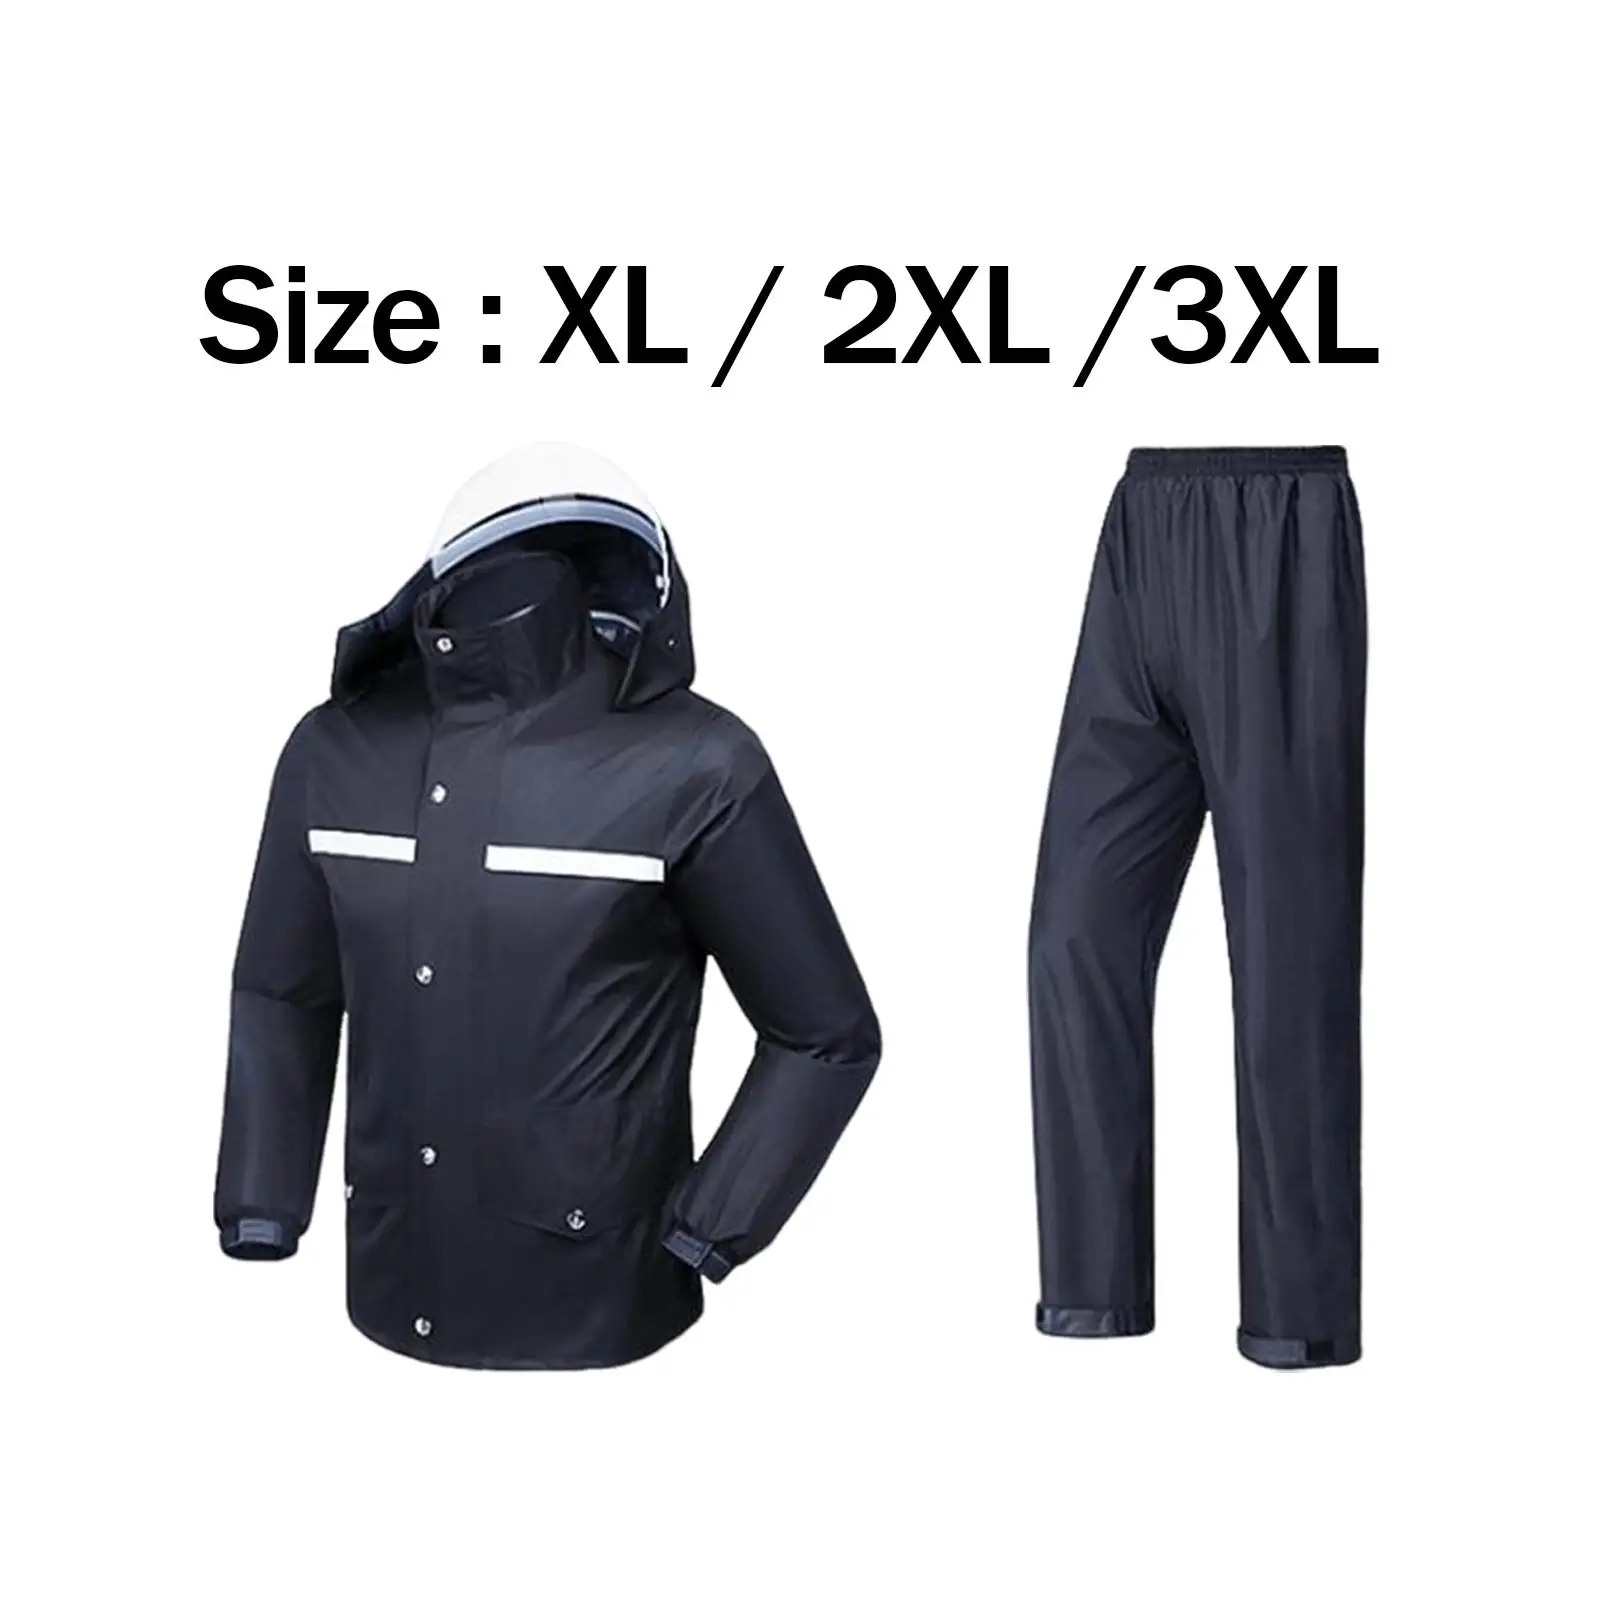 Rain Suit Jacket and Trouser Suit Hooded Breathable Elastic Machine Wash Durable Lightweight Clear Double Brim for Outdoor